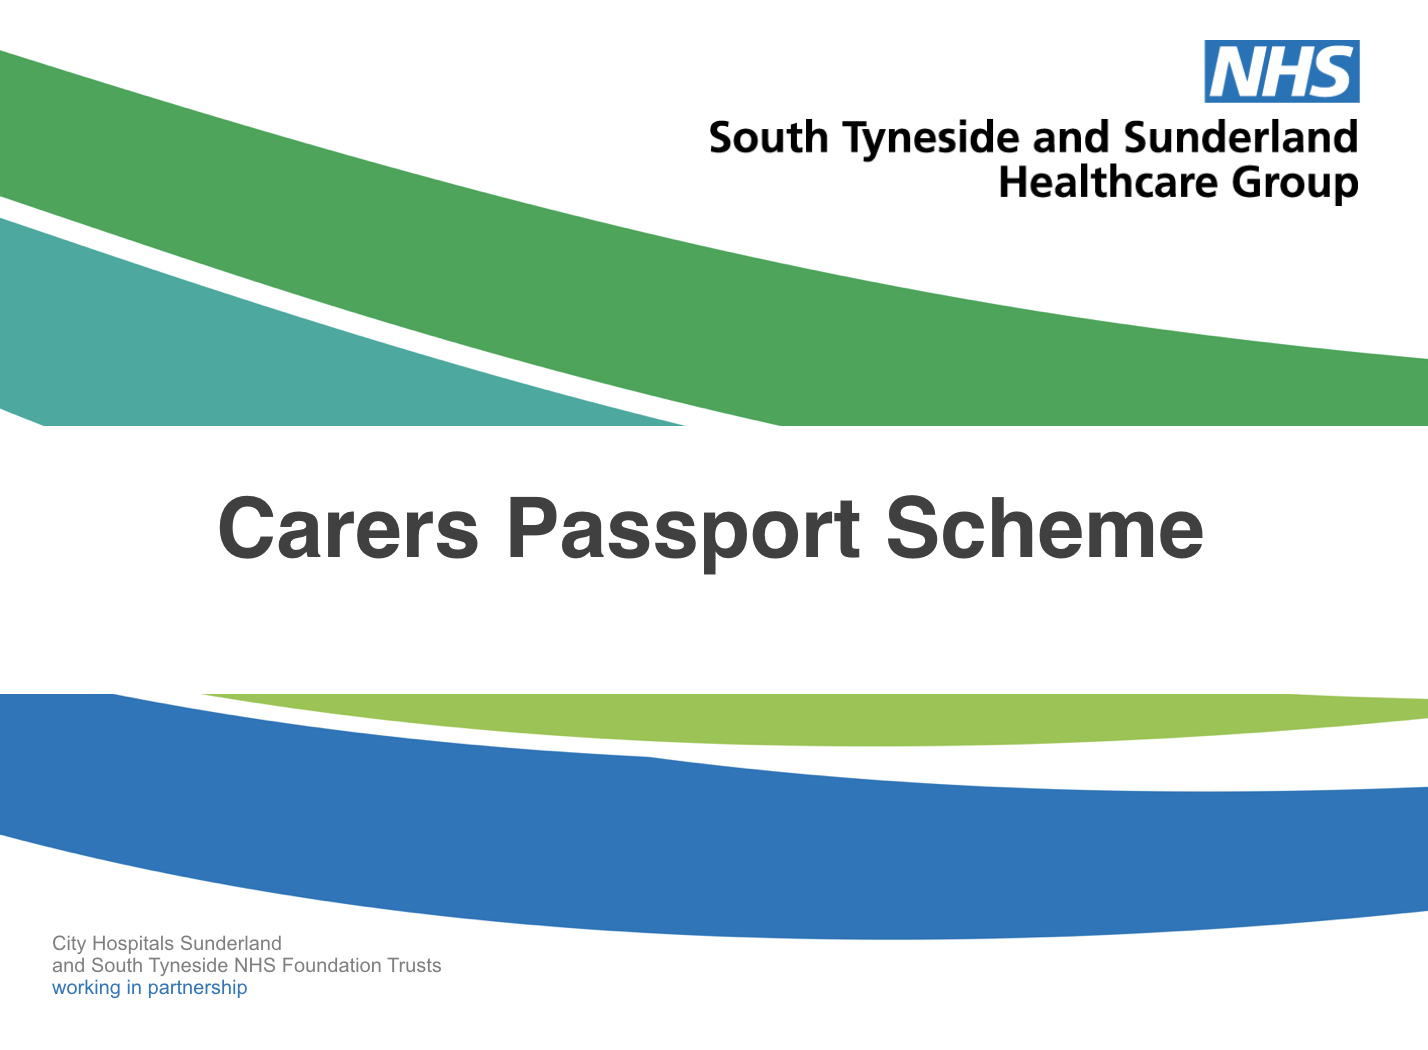 South Tyneside and Sunderland Health Care Group - Carer Passport Initiative featured image